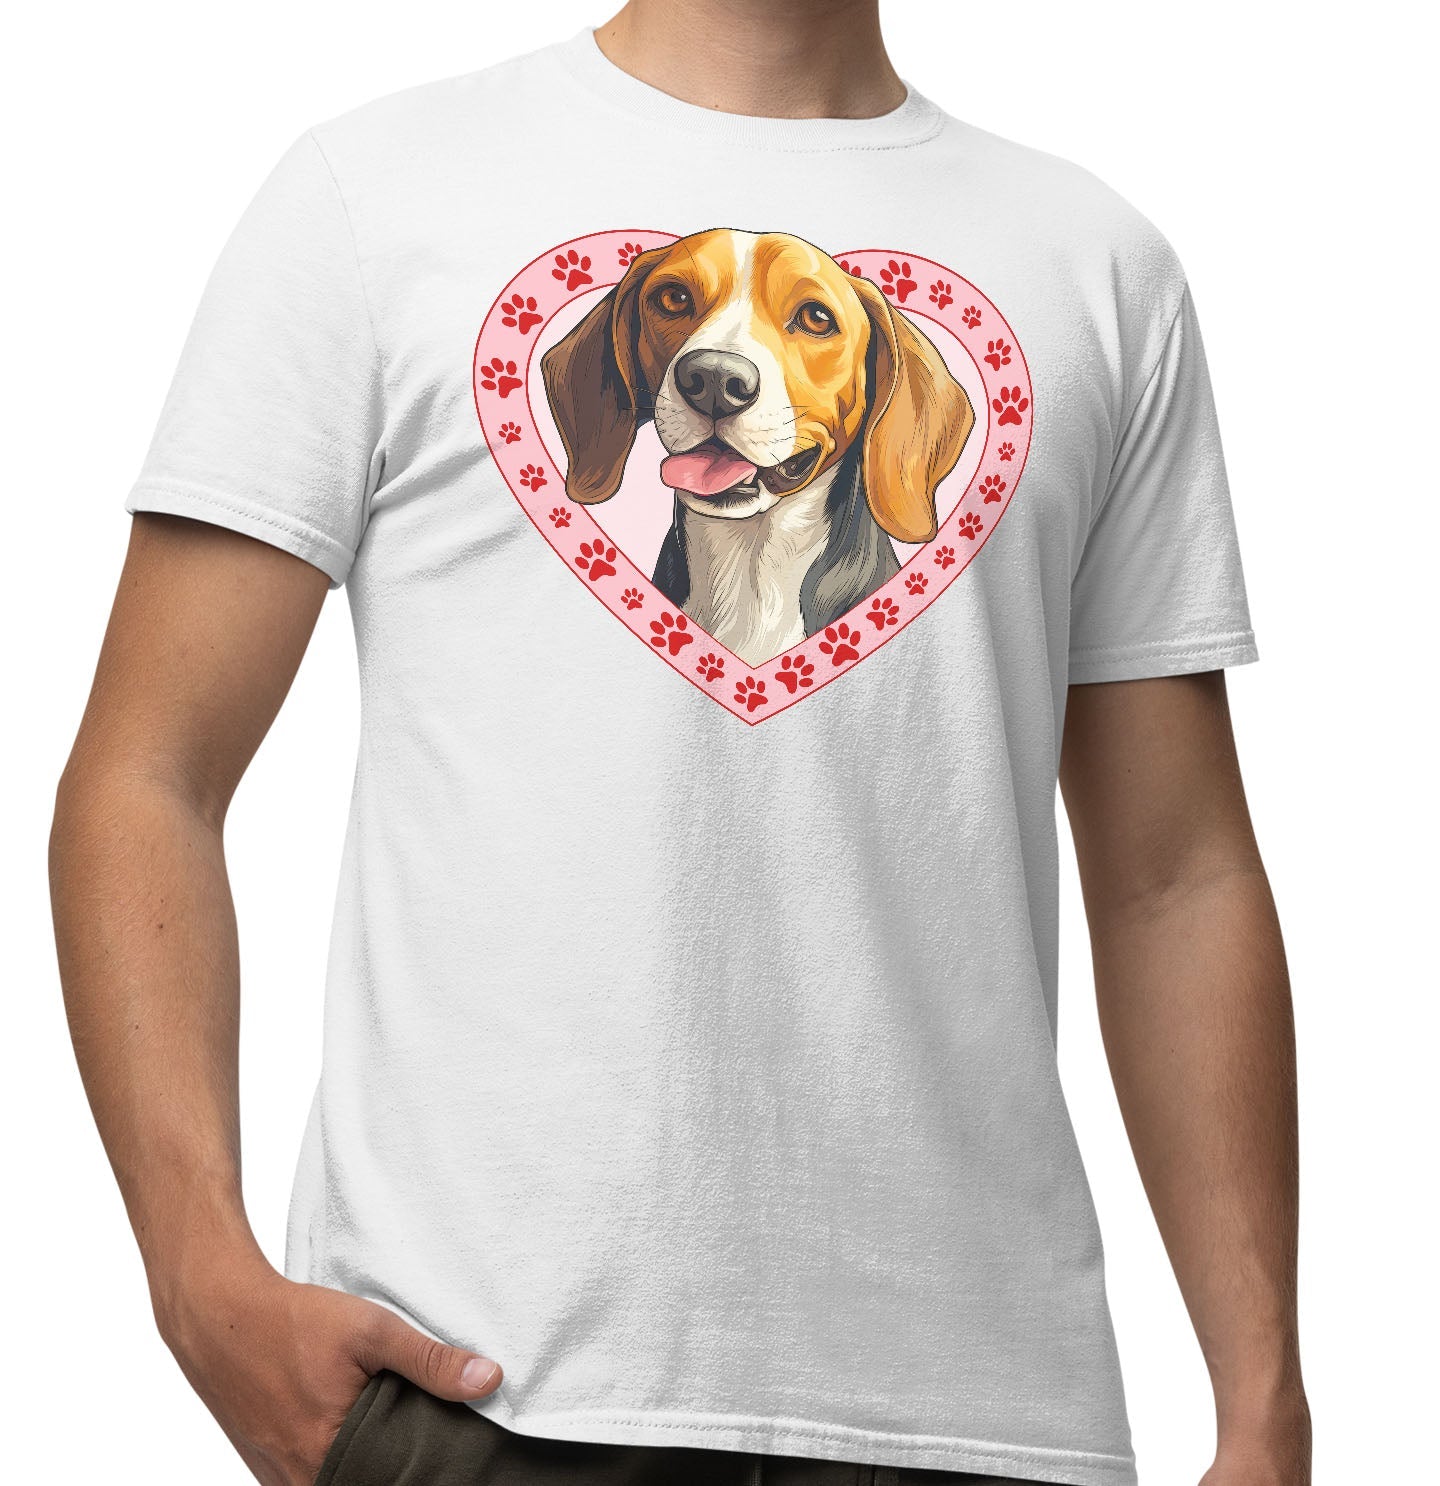 American Foxhound Illustration In Heart - Adult Unisex T-Shirt